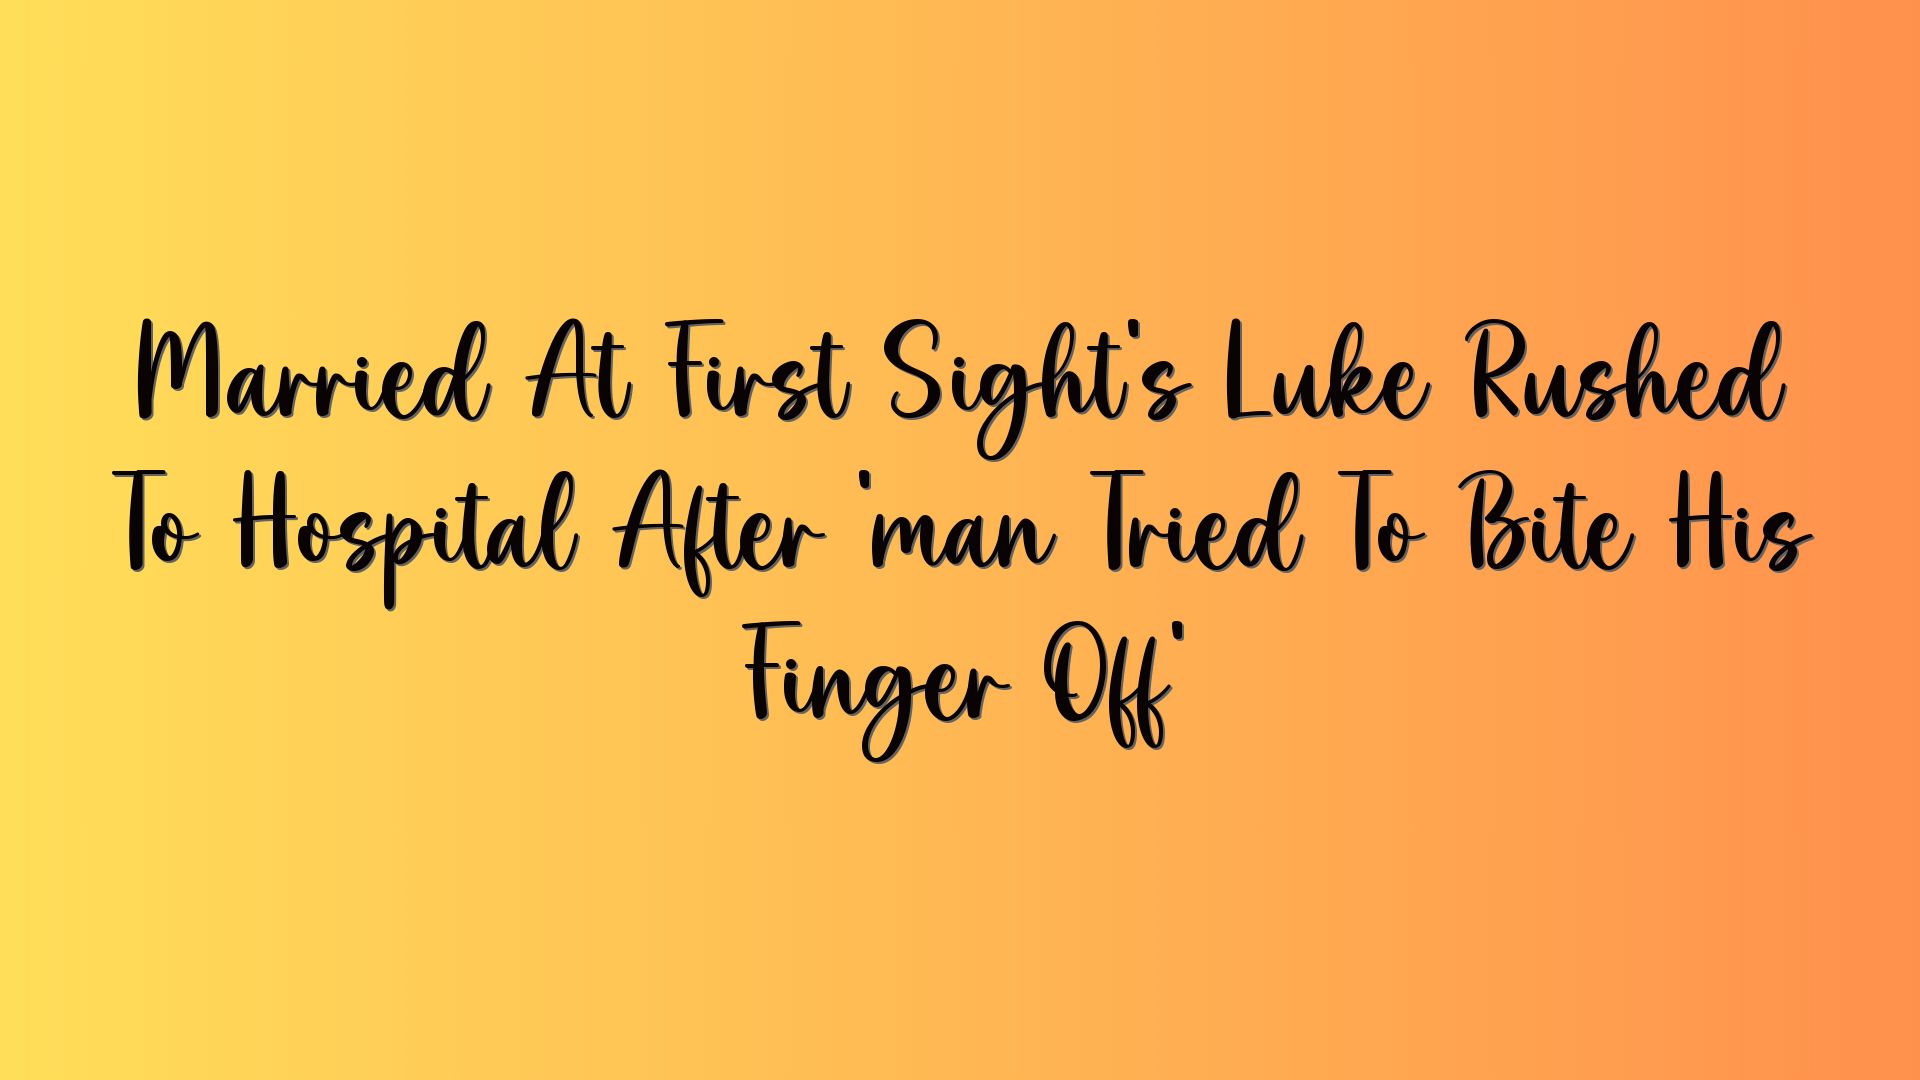 Married At First Sight’s Luke Rushed To Hospital After ‘man Tried To Bite His Finger Off’